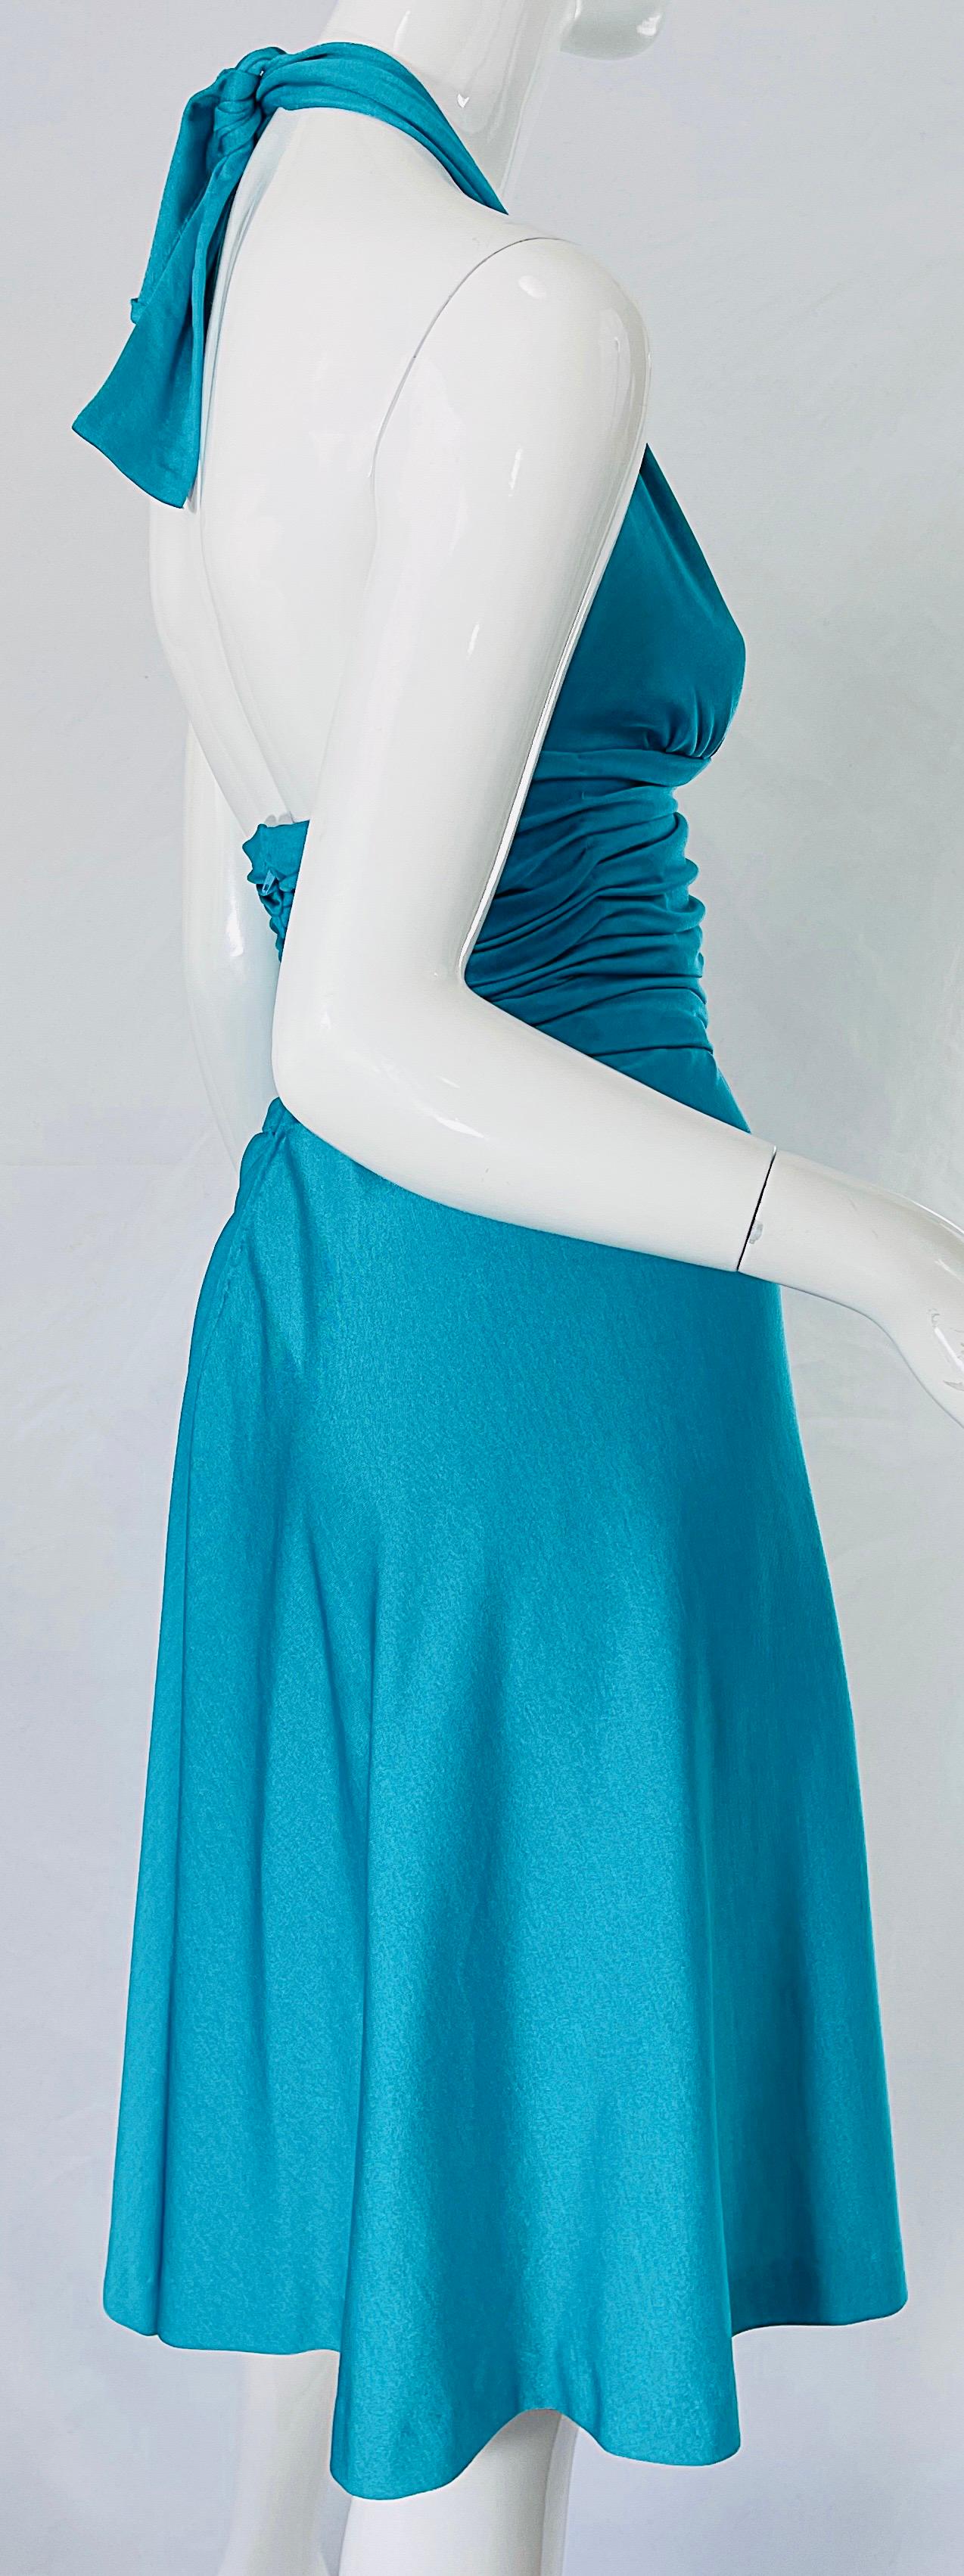 1970s Loris Azzaro Couture Turquoise Blue Silk Jersey Rhinestone Vintage Dress For Sale 6